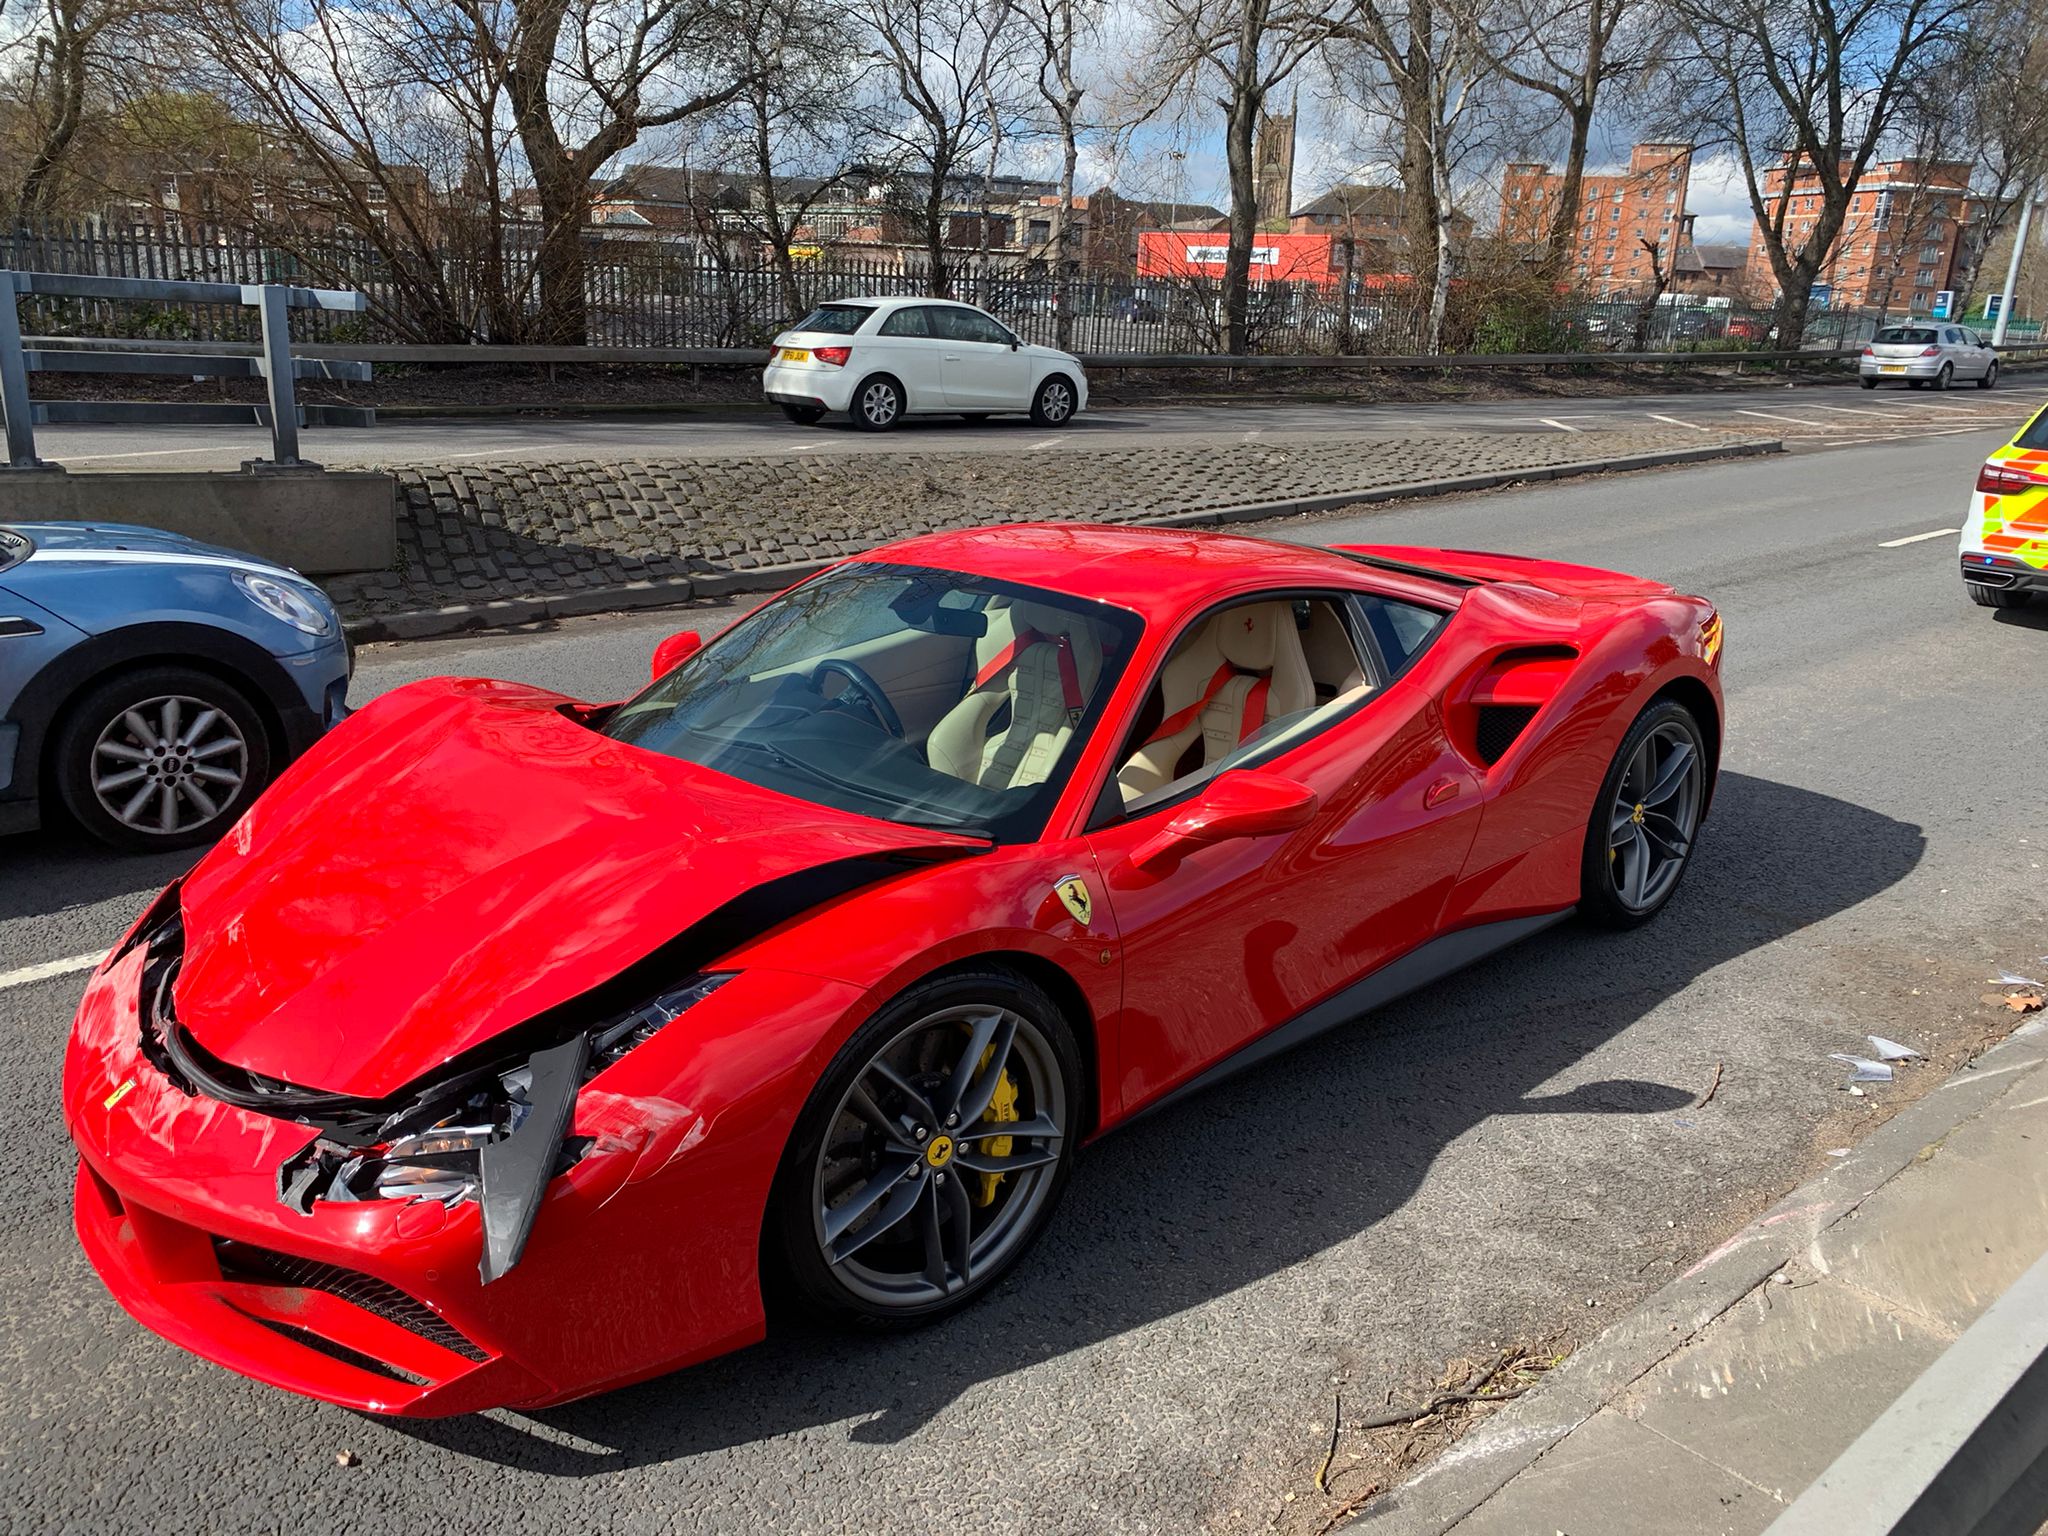 UK NEWS | Driver ends up smashing up new Ferrari after driving it less than two miles